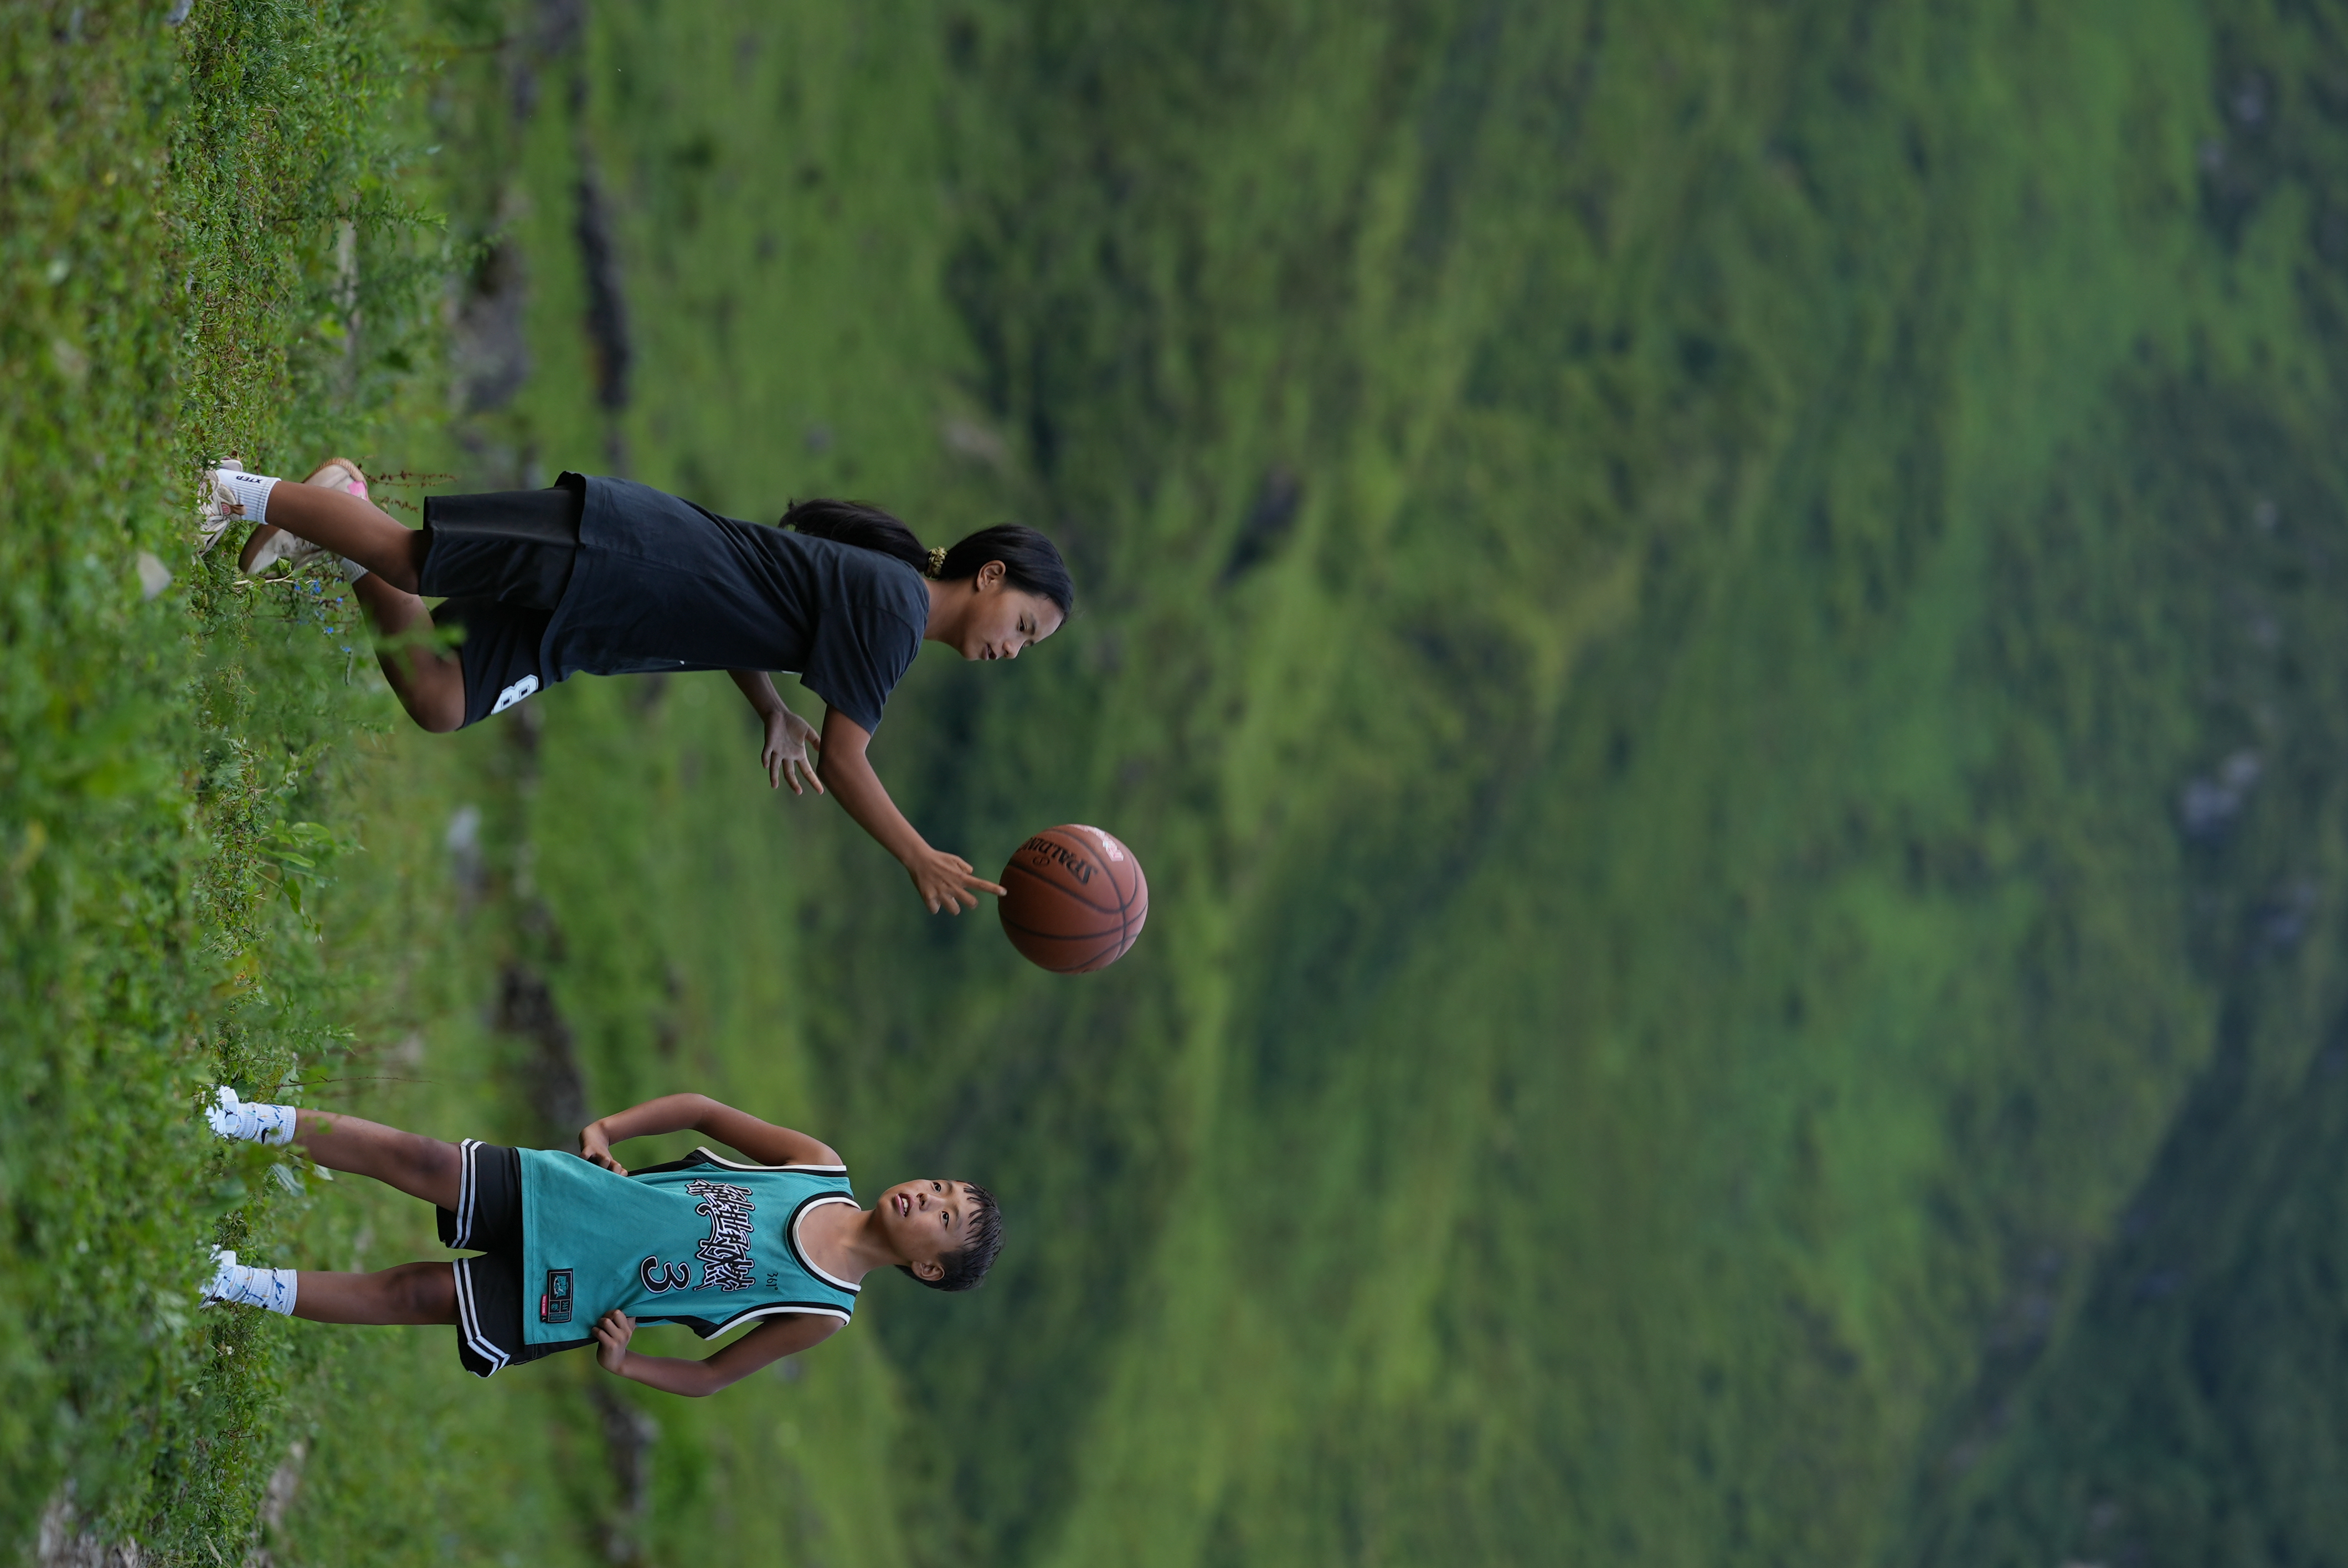 This undated photo shows kids pairing basketball finger spinning skills in Liangshan Yi Autonomous Prefecture, southwest China's Sichuan Province. /CGTN